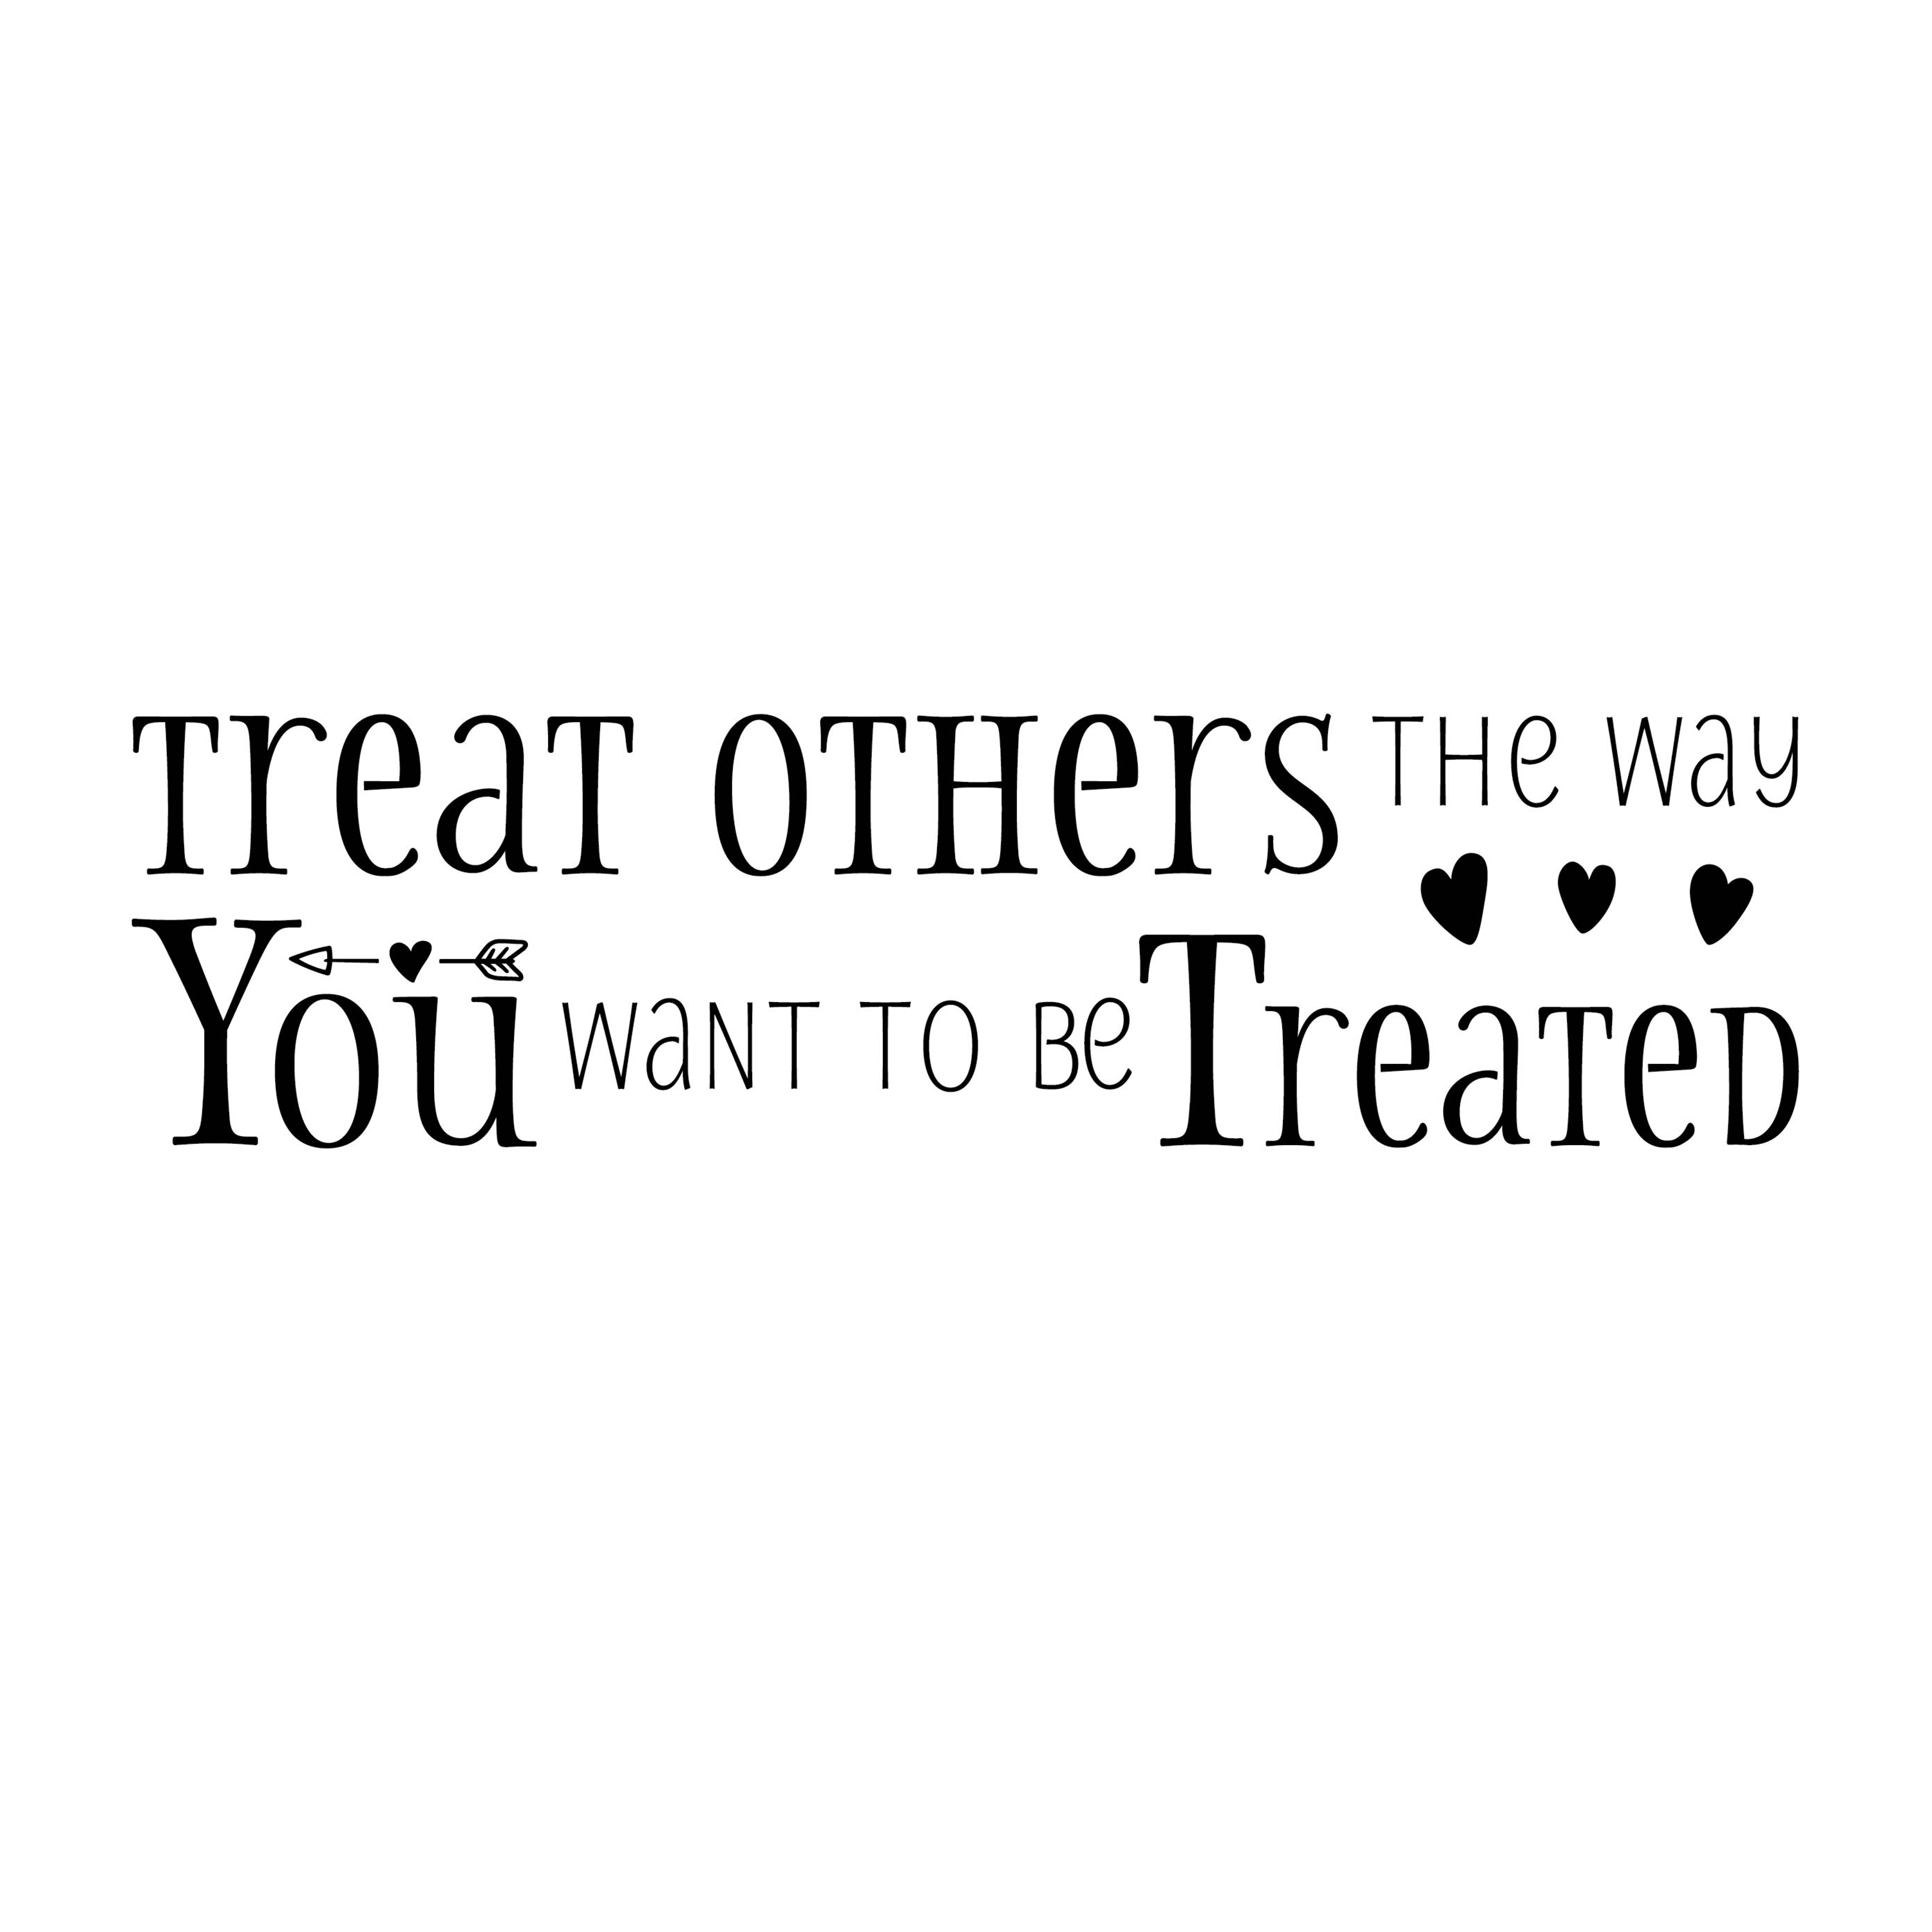 Treat Others the Way You Want to be Treated Vinyl Wall Decal Inspirational